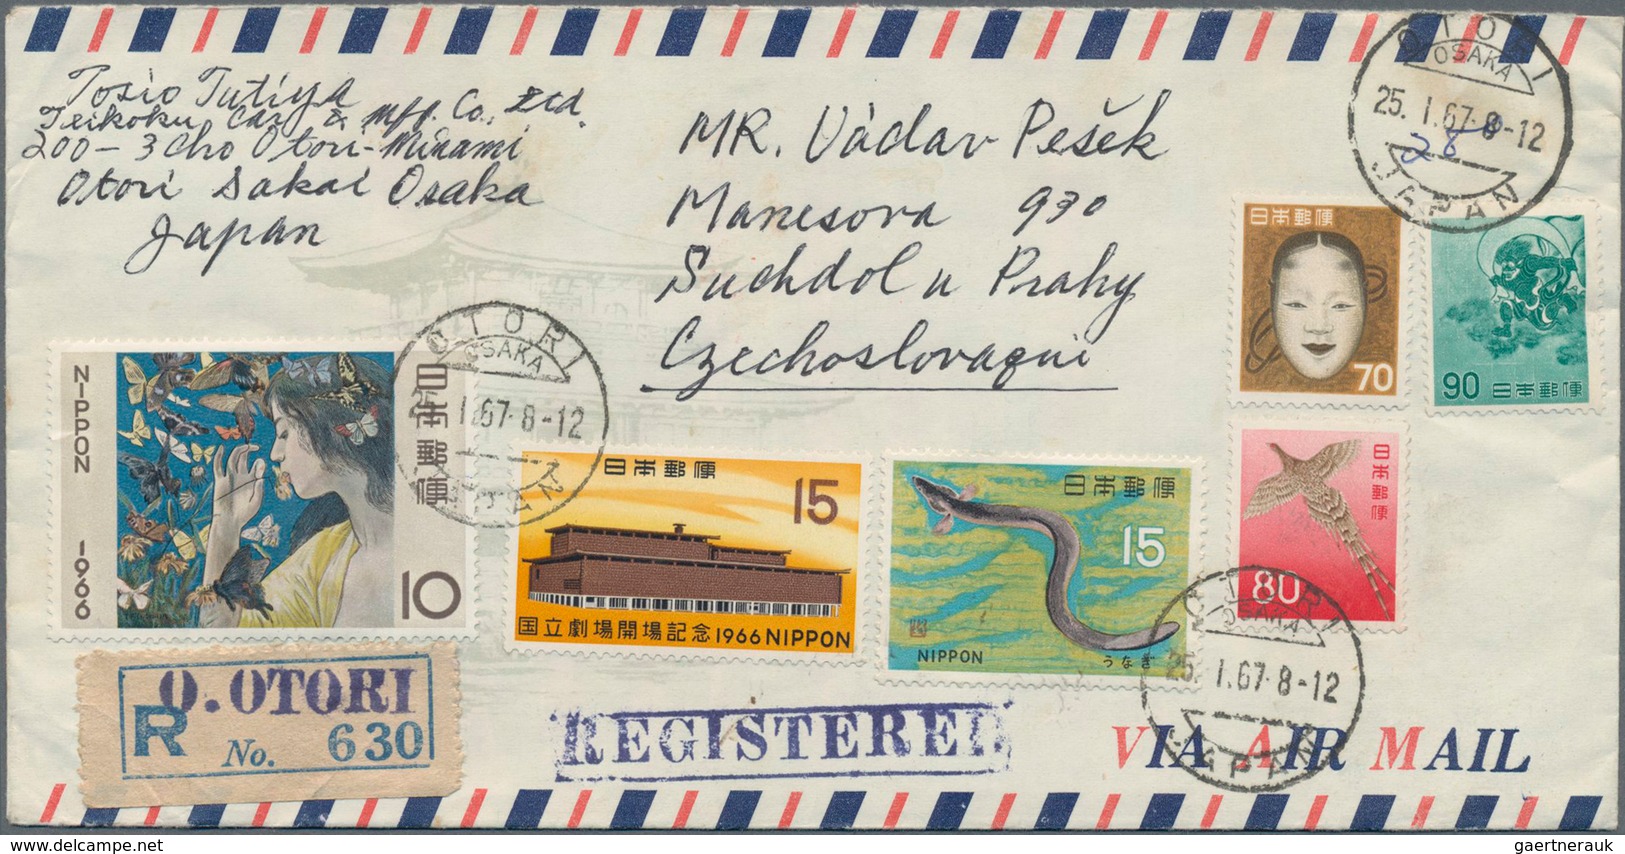 Japan: 1937/60 (ca.), covers (7), franked ppc (8), uprated stationery (1) all used foreign ex.1940 e